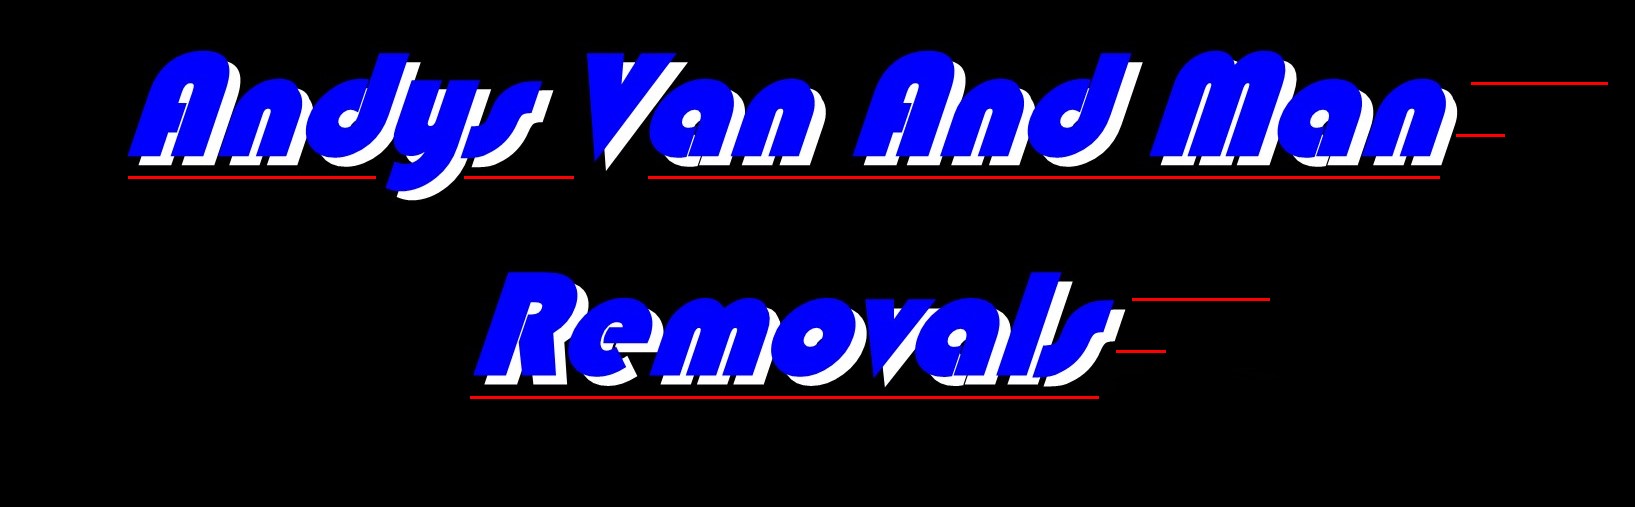 andys van and man removals, home